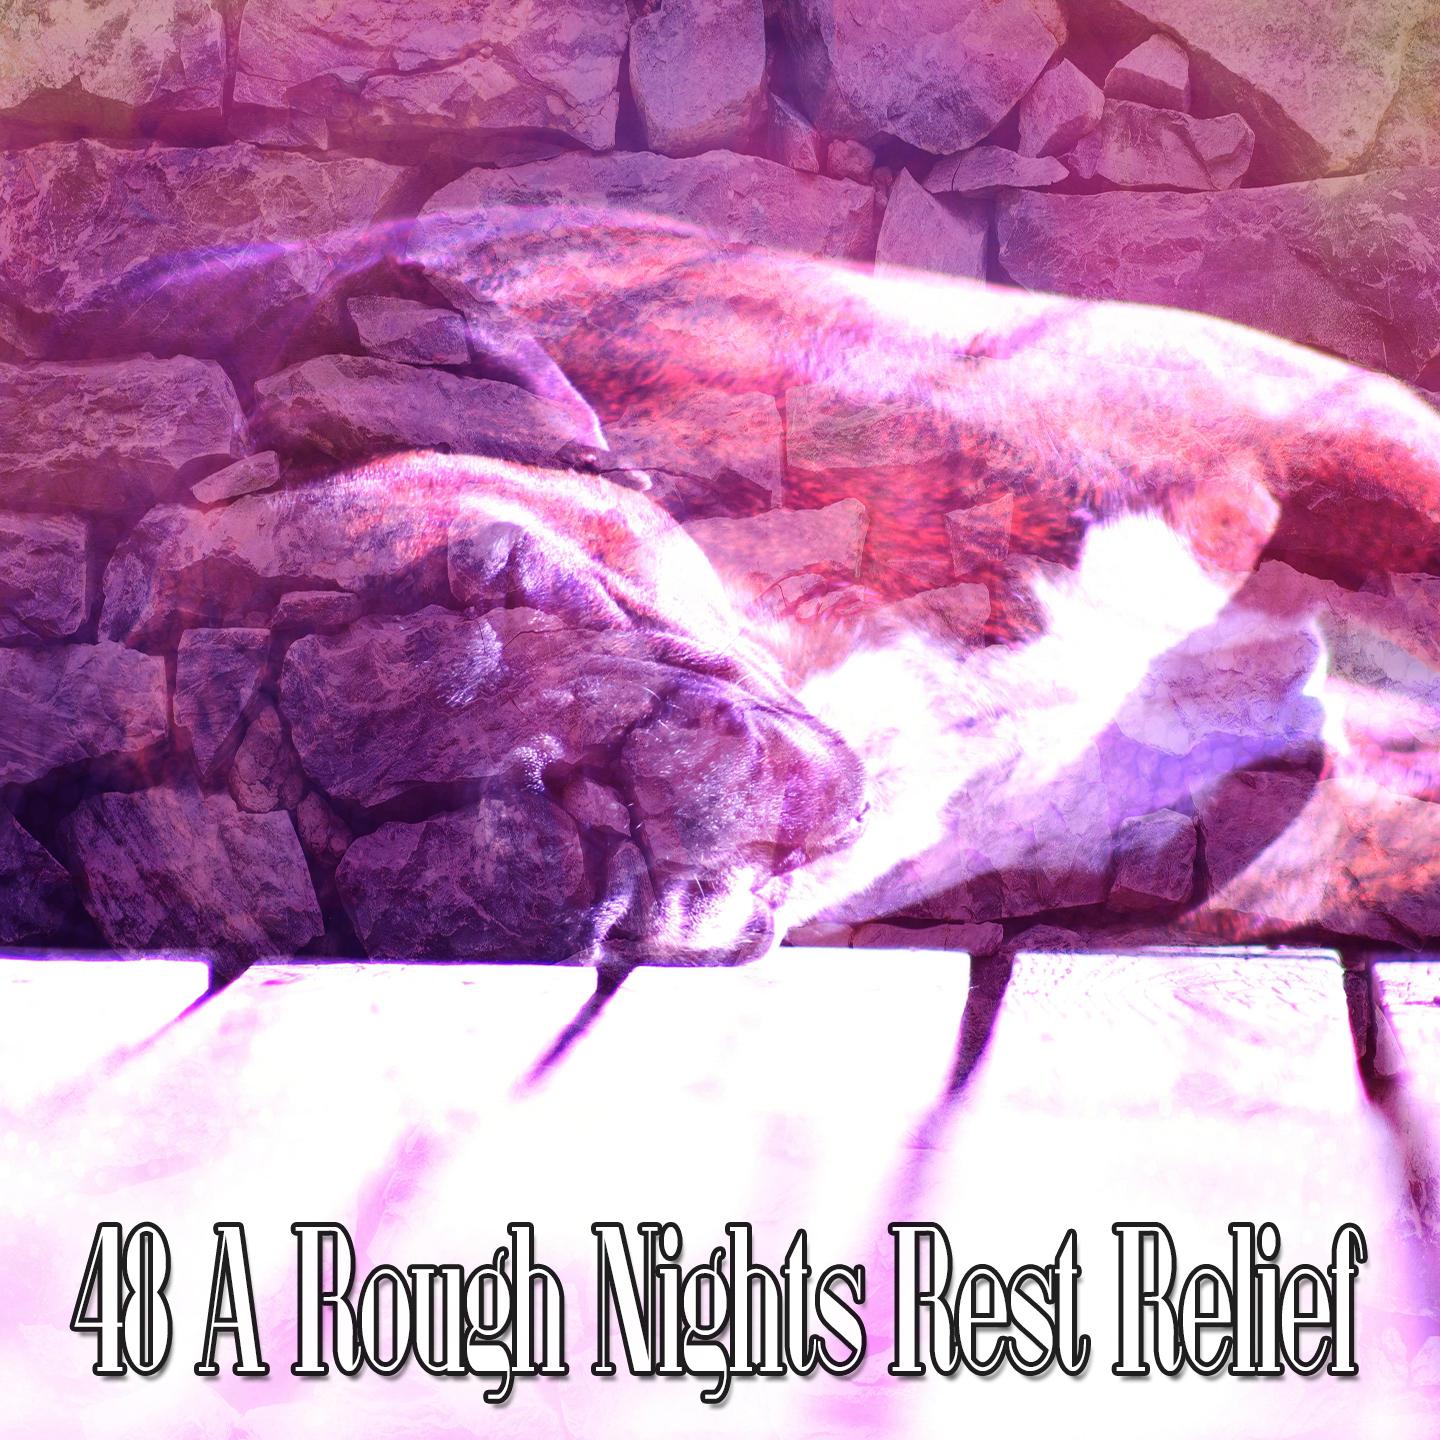 48 A Rough Nights Rest Relief